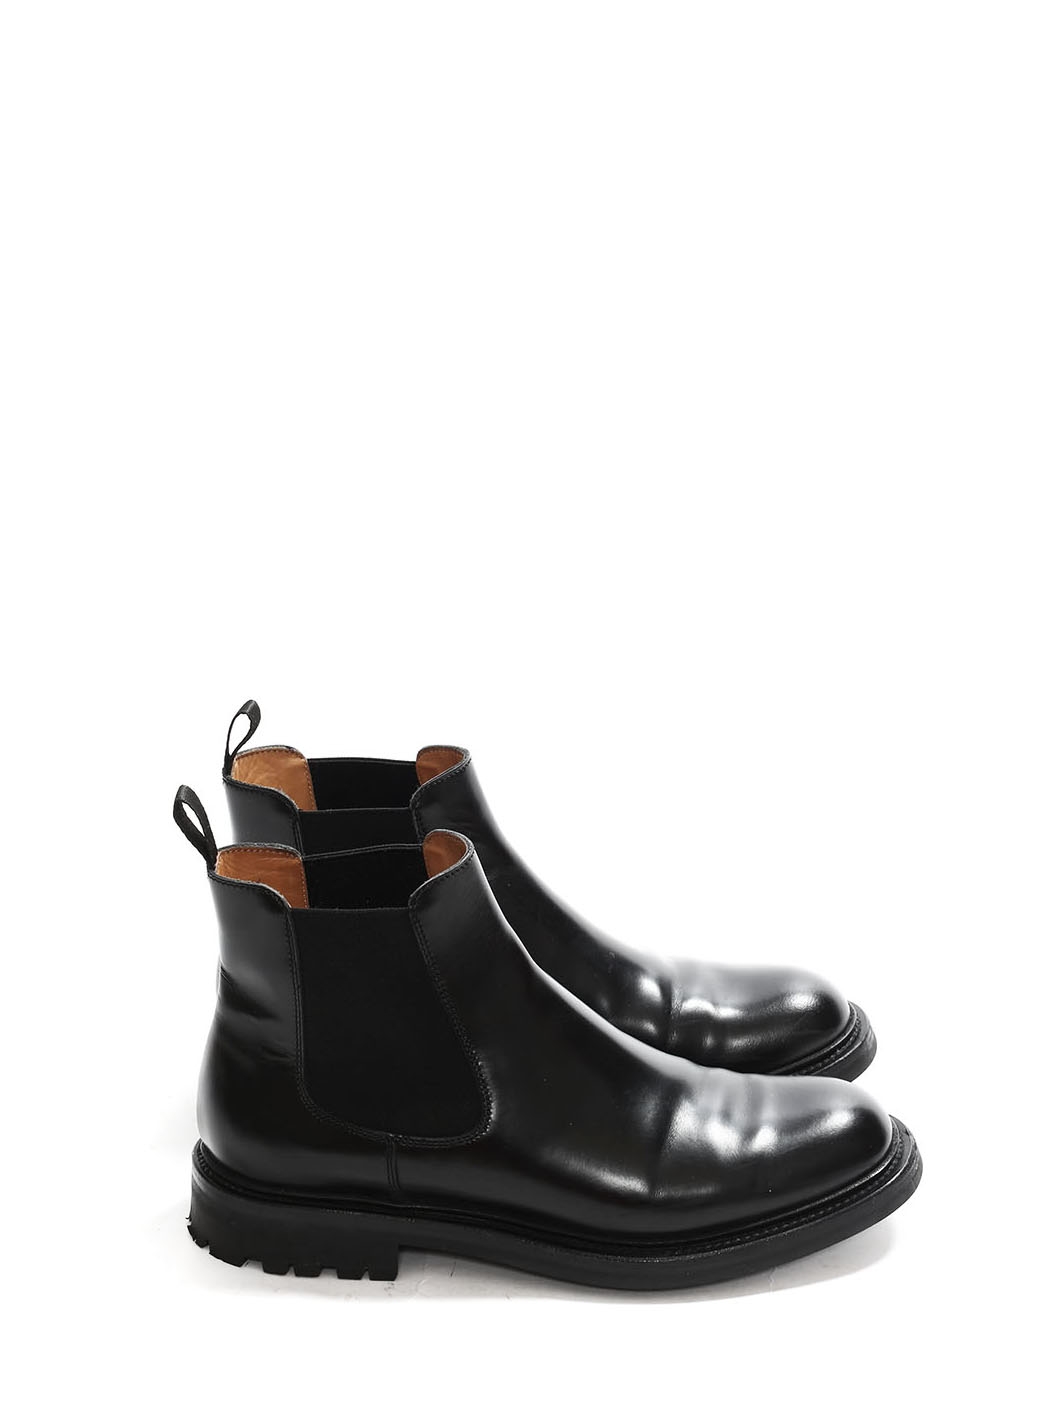 Boutique CHURCH'S Genie black patent leather Chelsea flat ankle boots ...